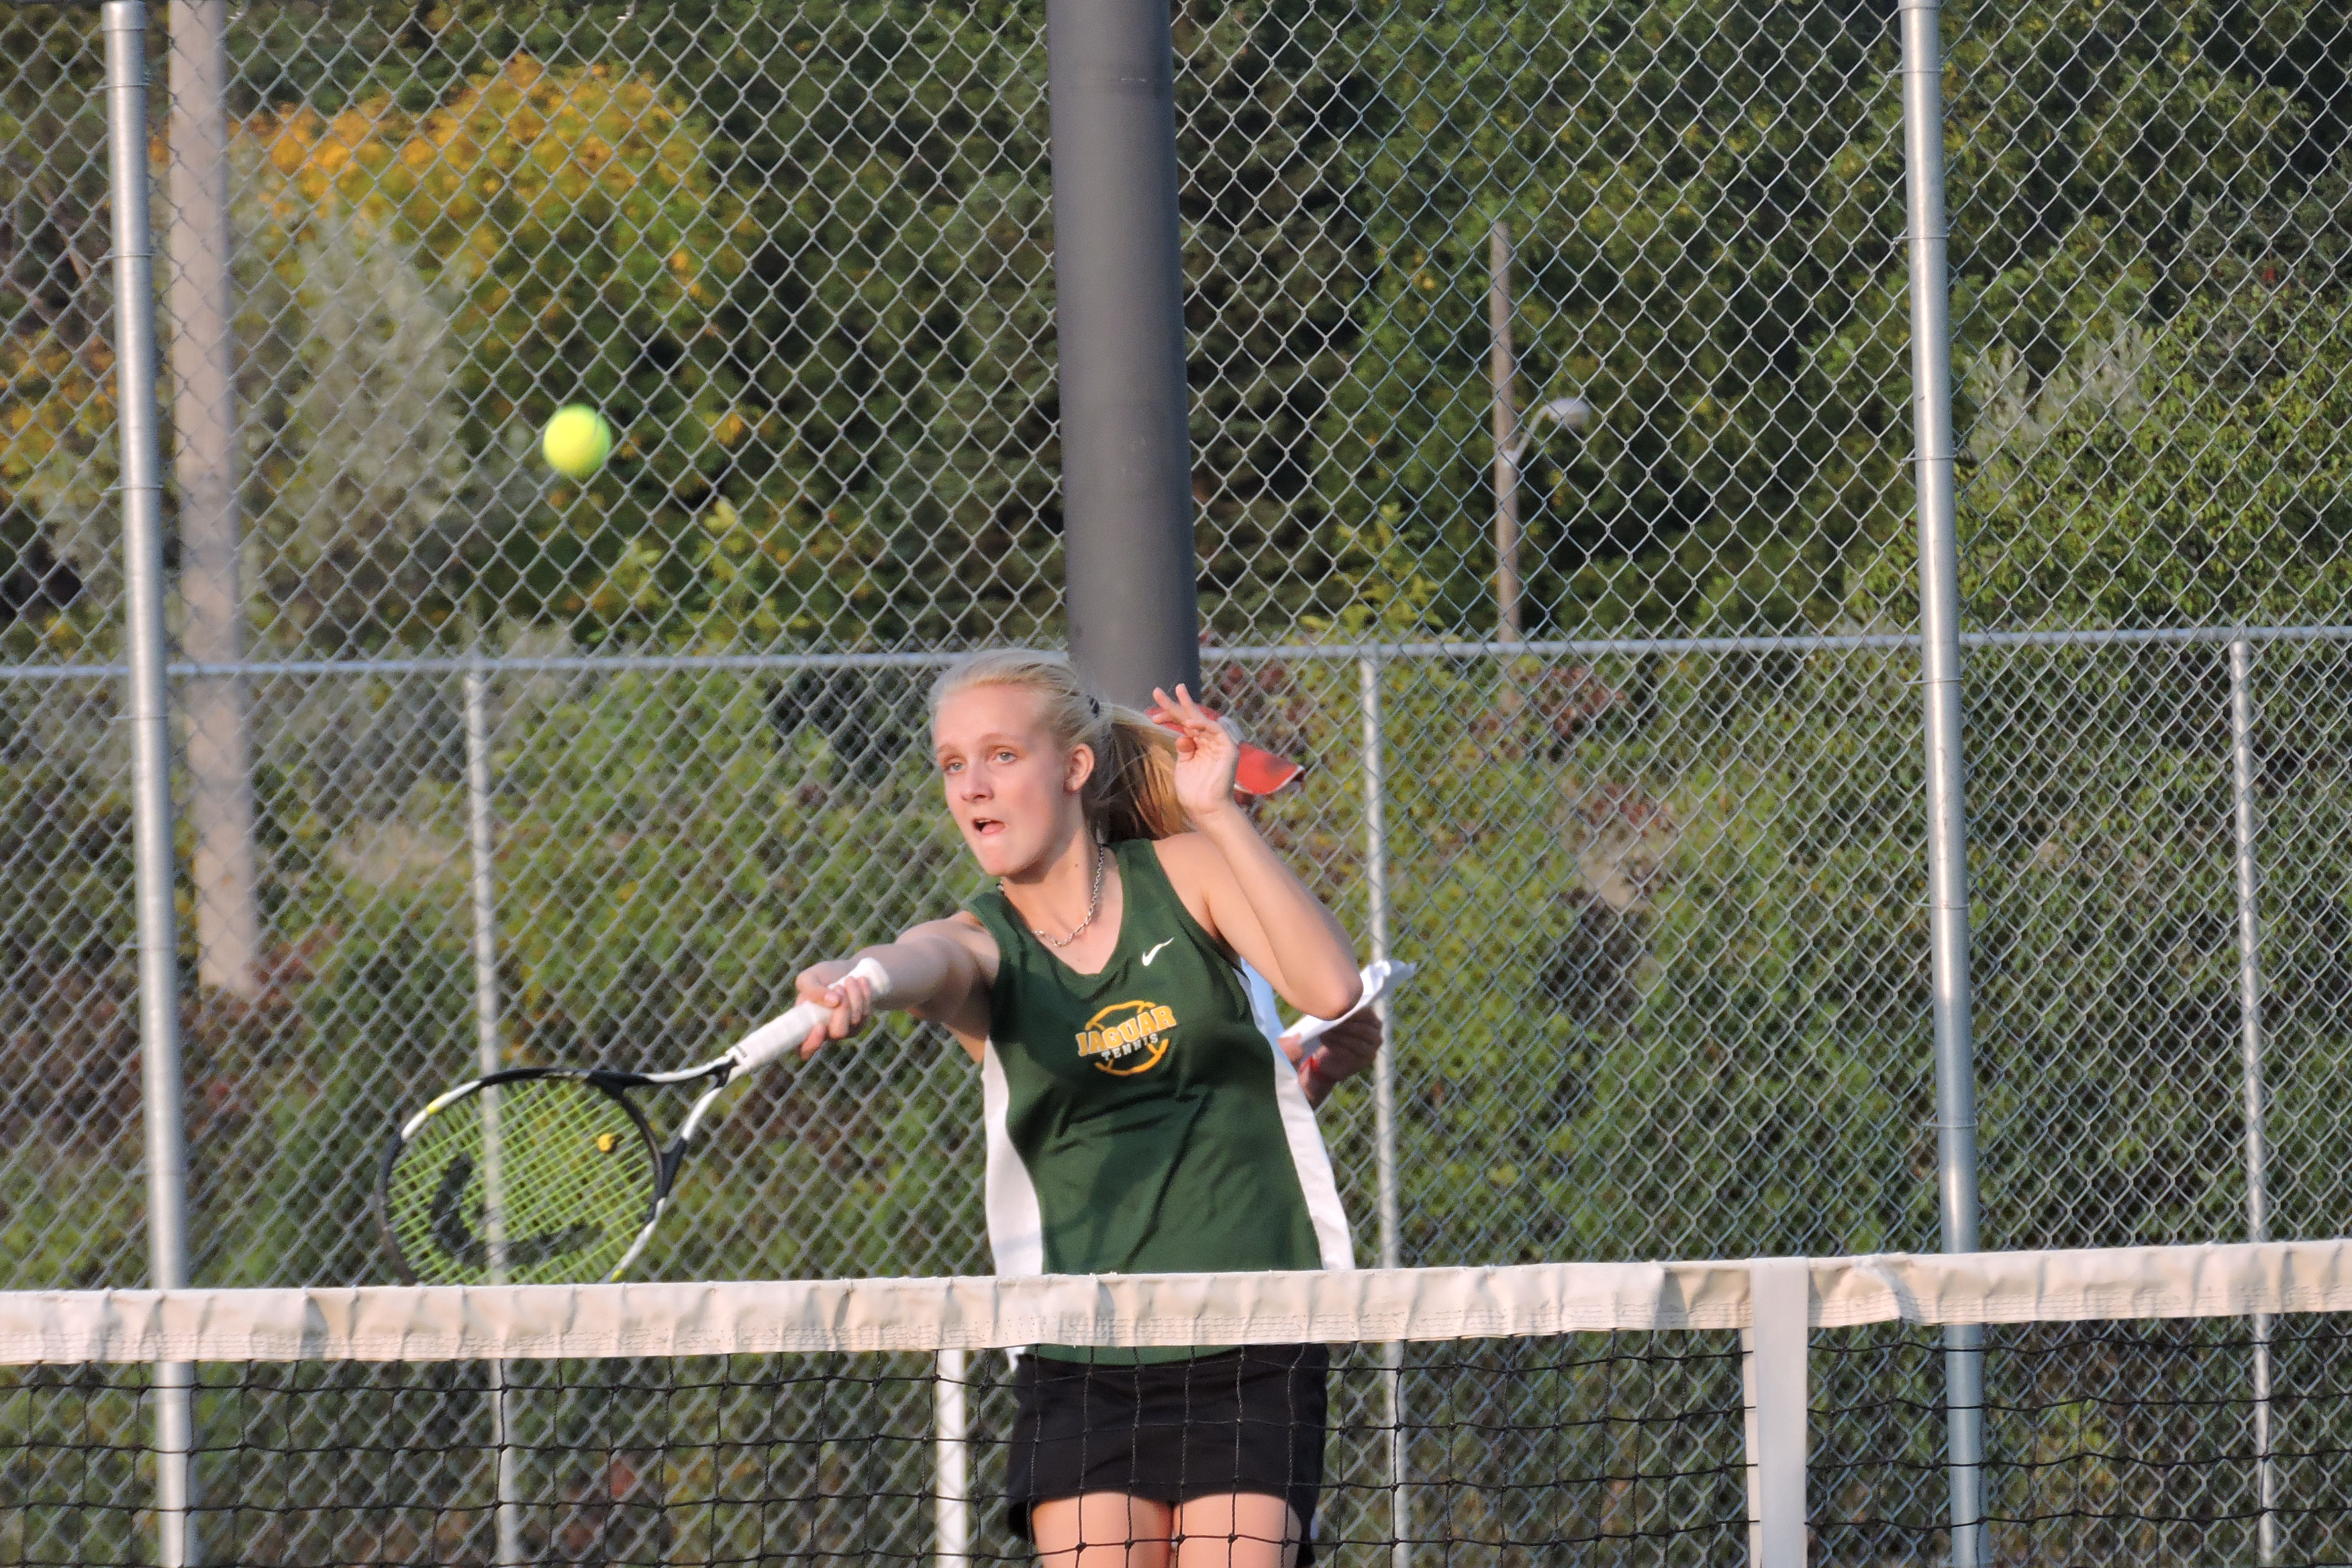 Jaguars blow by Hornets in FRCC Tennis Match